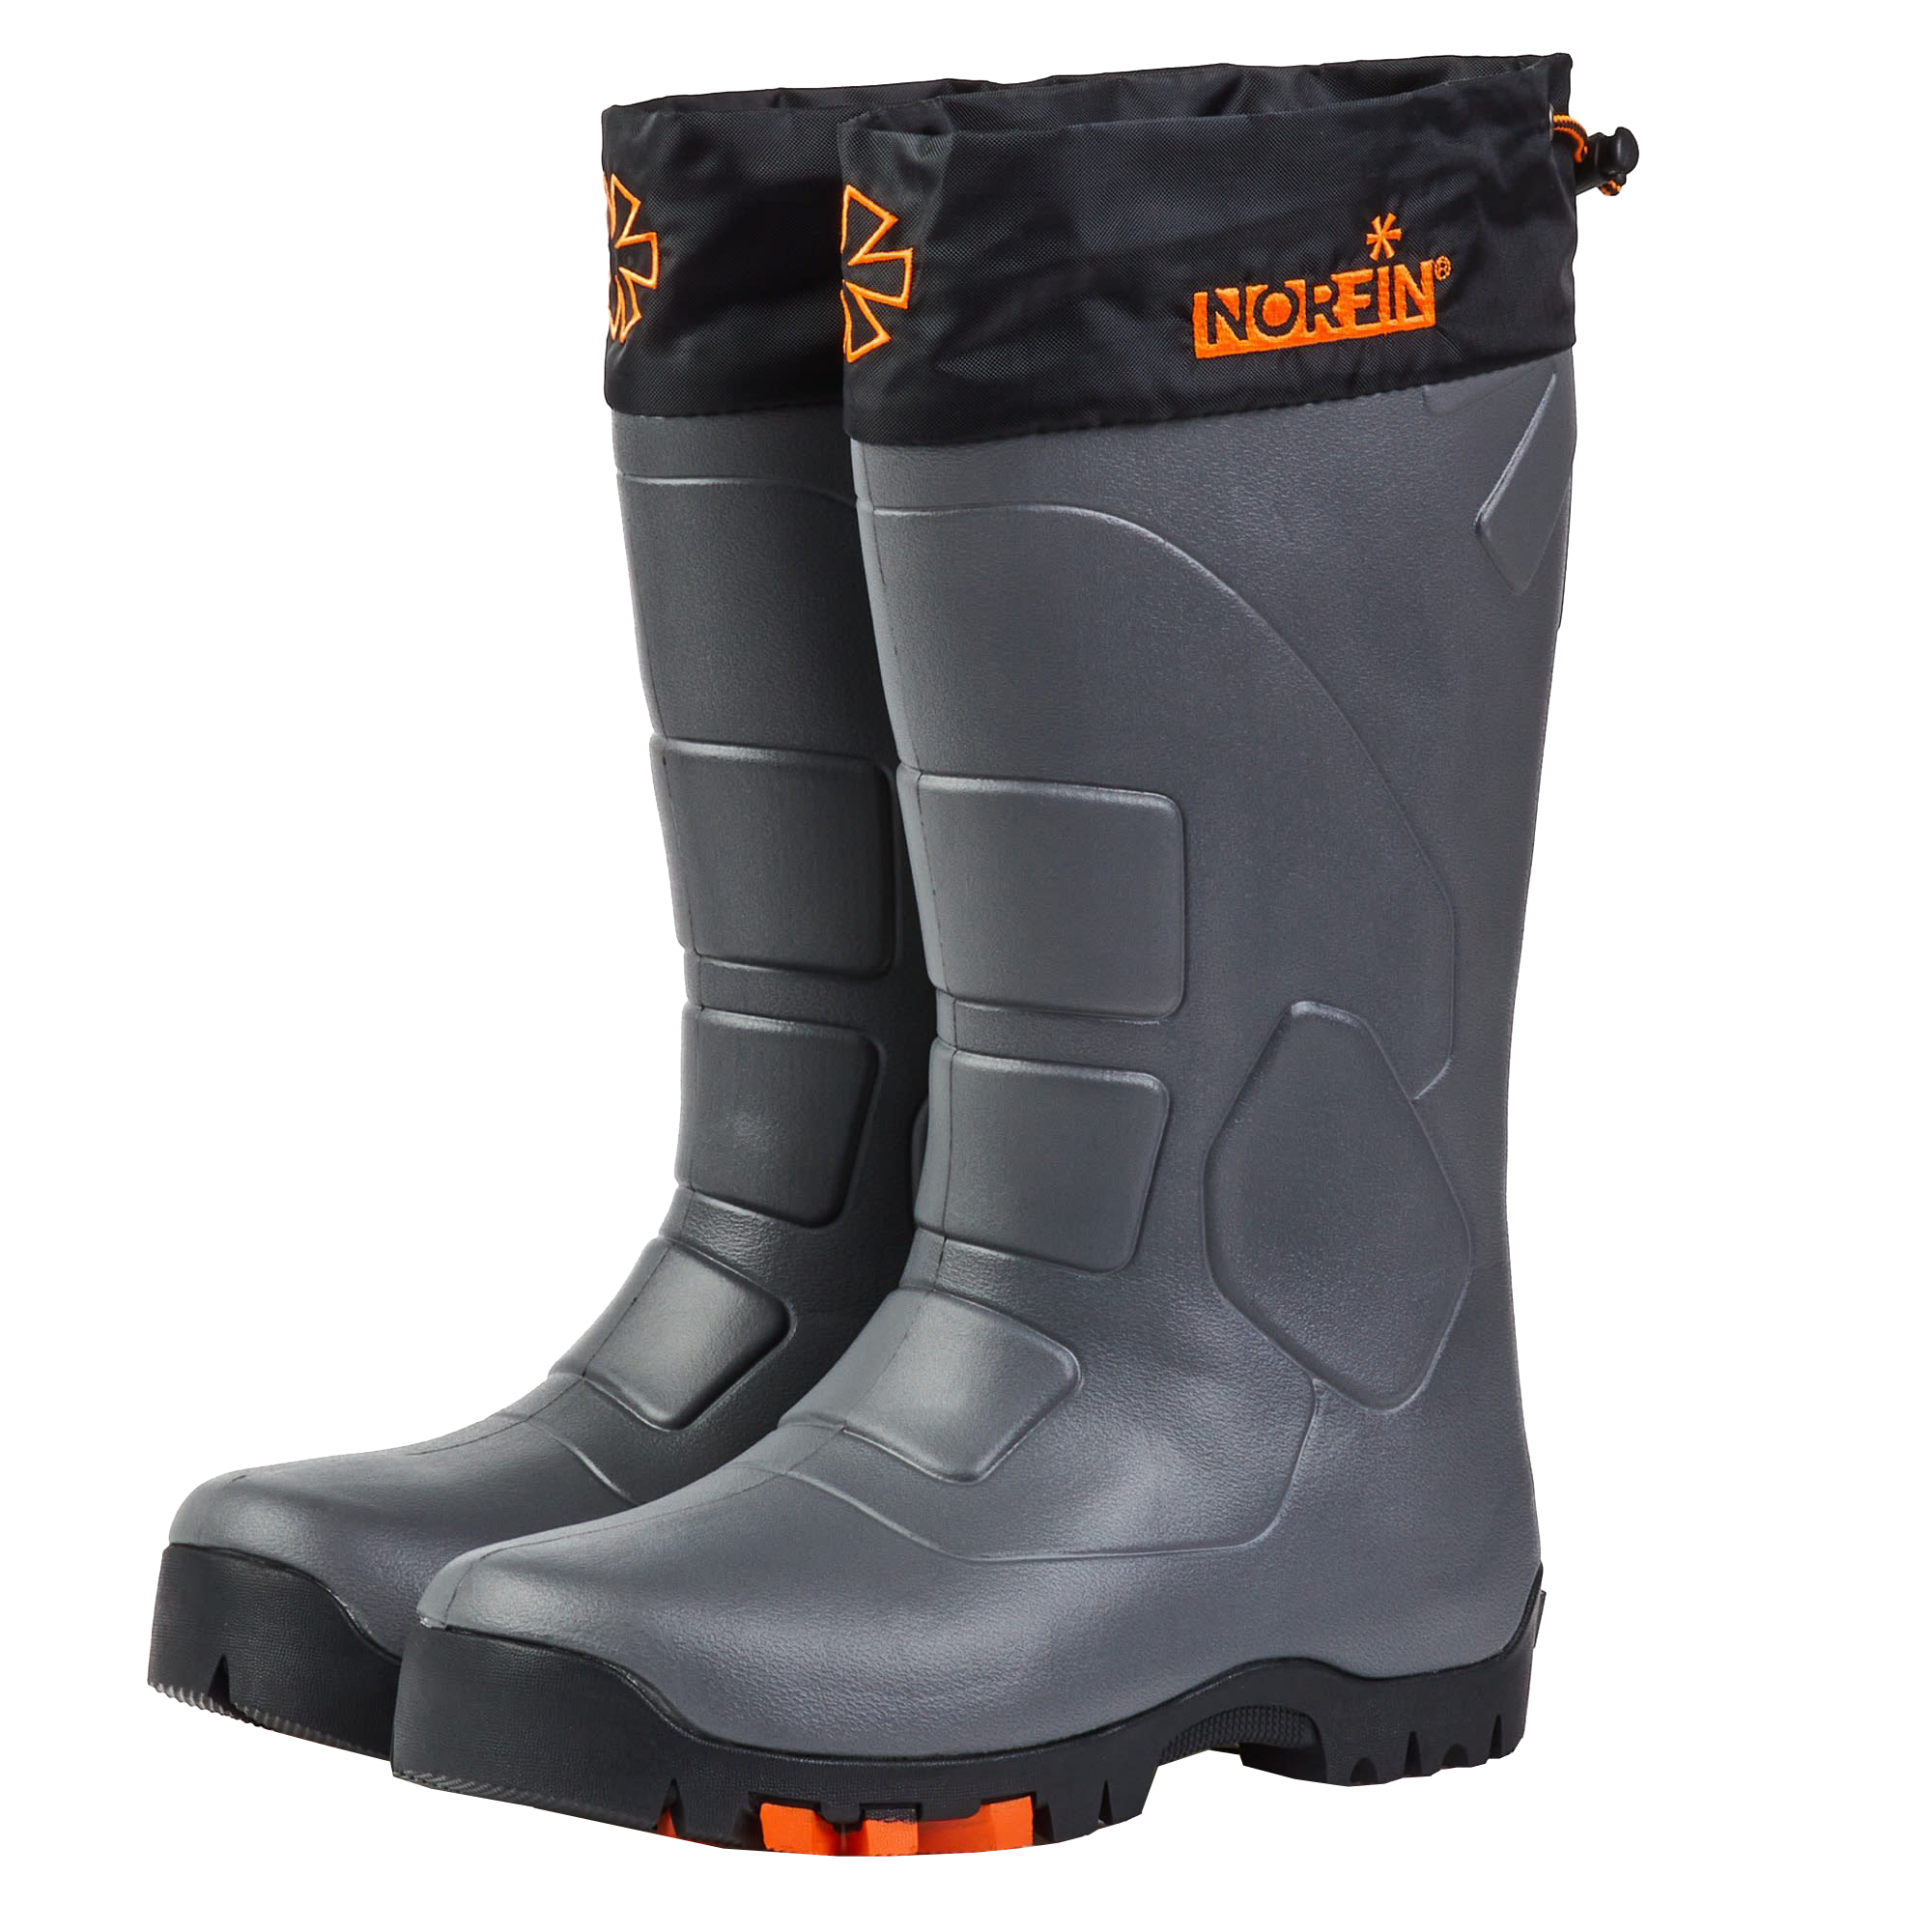 Norfin Klondike 2 Insulated Rubber Boots with Built-In Ice Cleats for Men